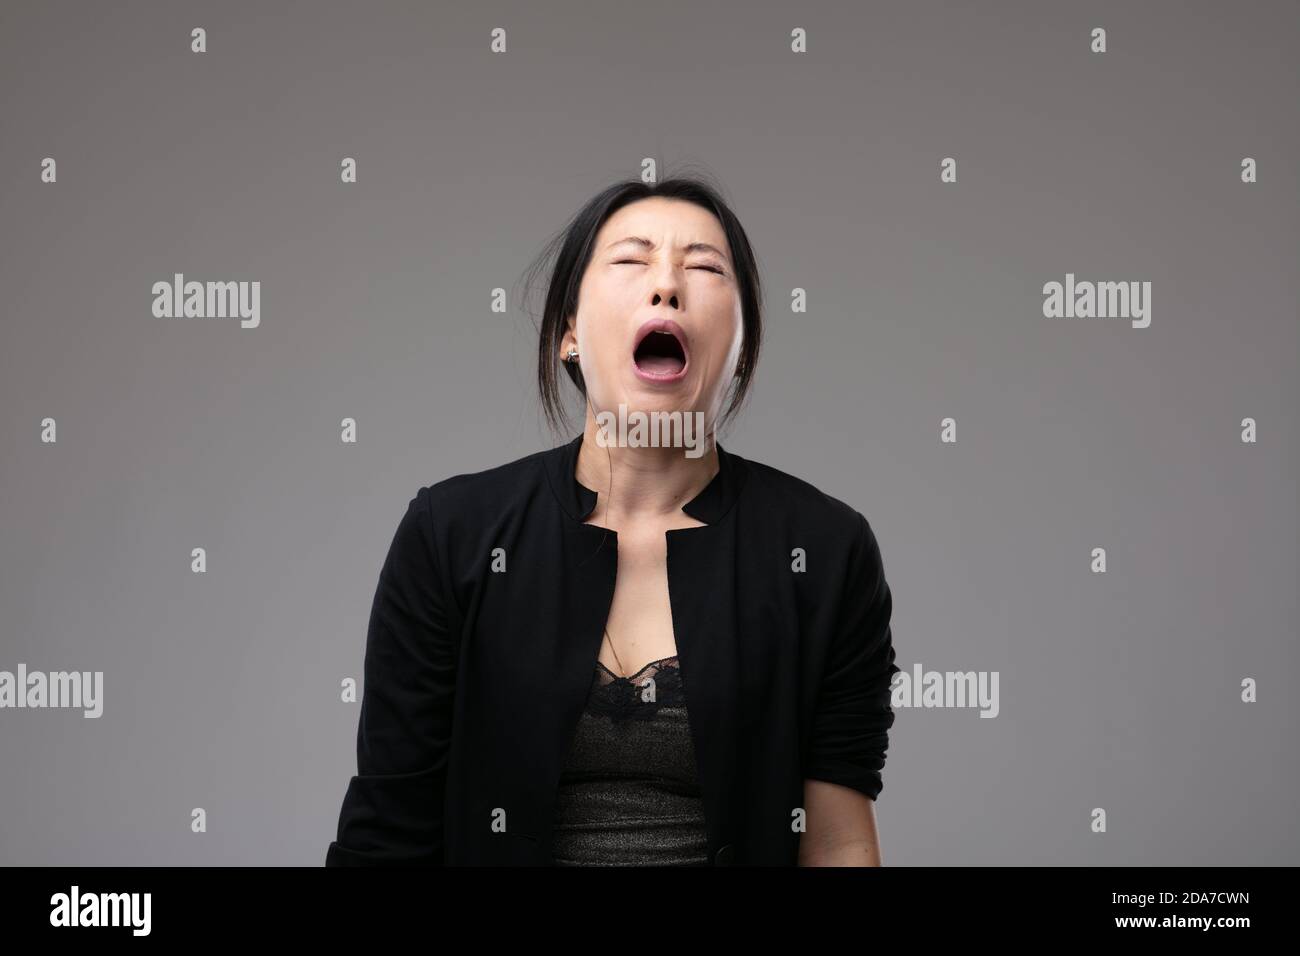 Woeful Asian woman wailing in anguish with her mouth open and a sorrowful expression over a grey studio background with copyspace Stock Photo